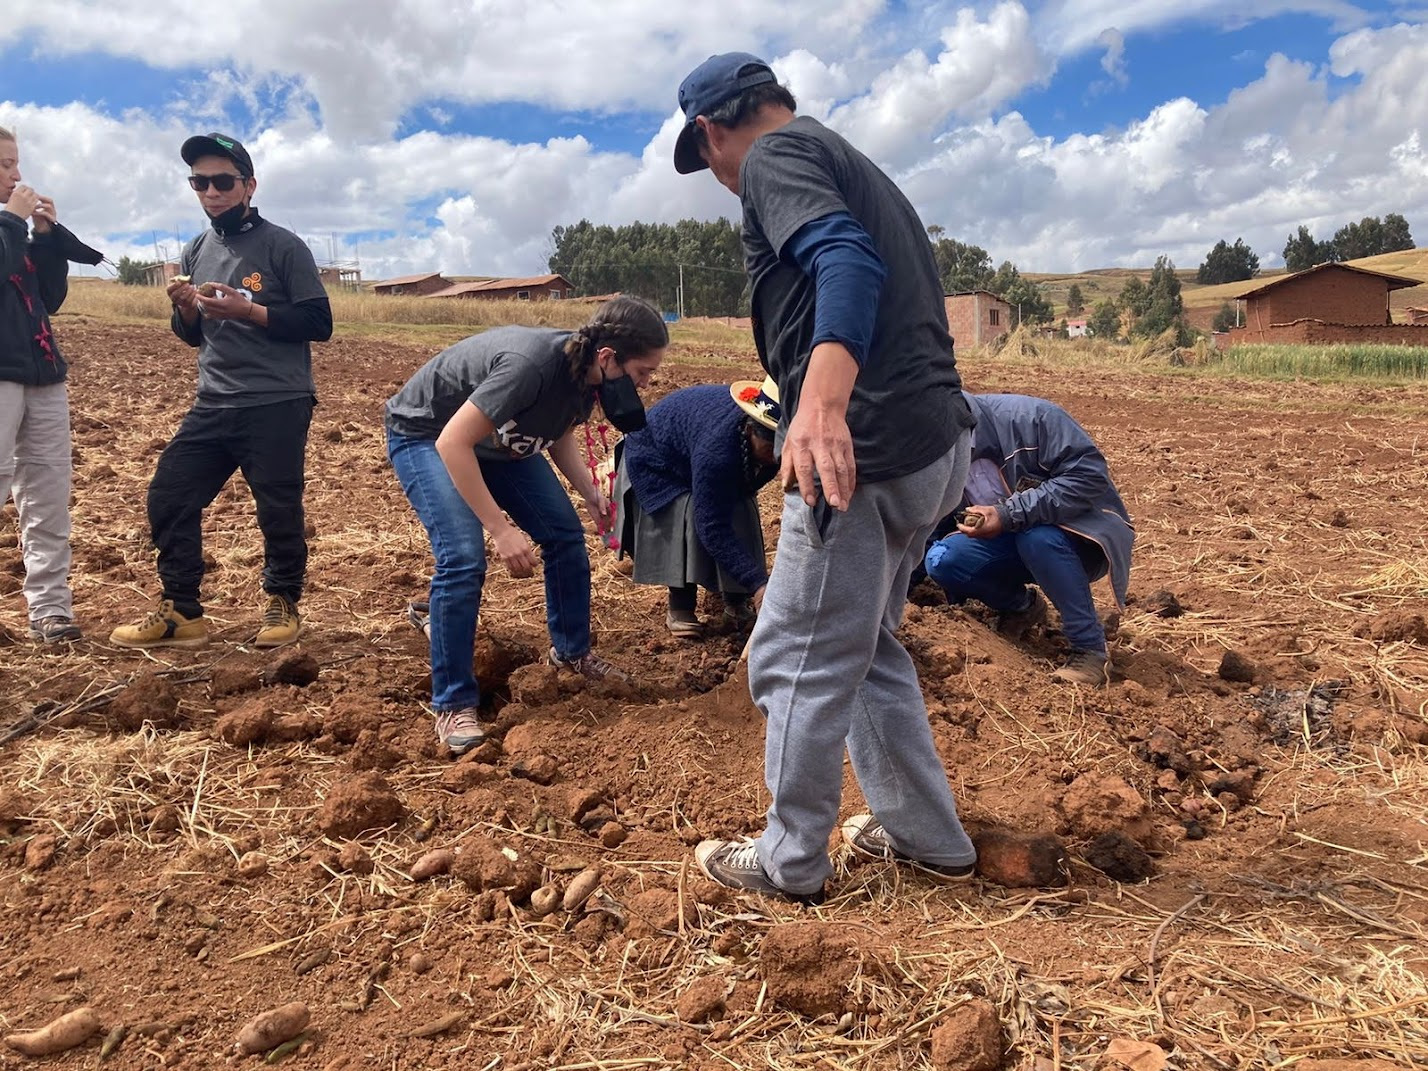 Students stand in a dirt field while their hosts pull food items such as potatoes from underground where they've been cooking.